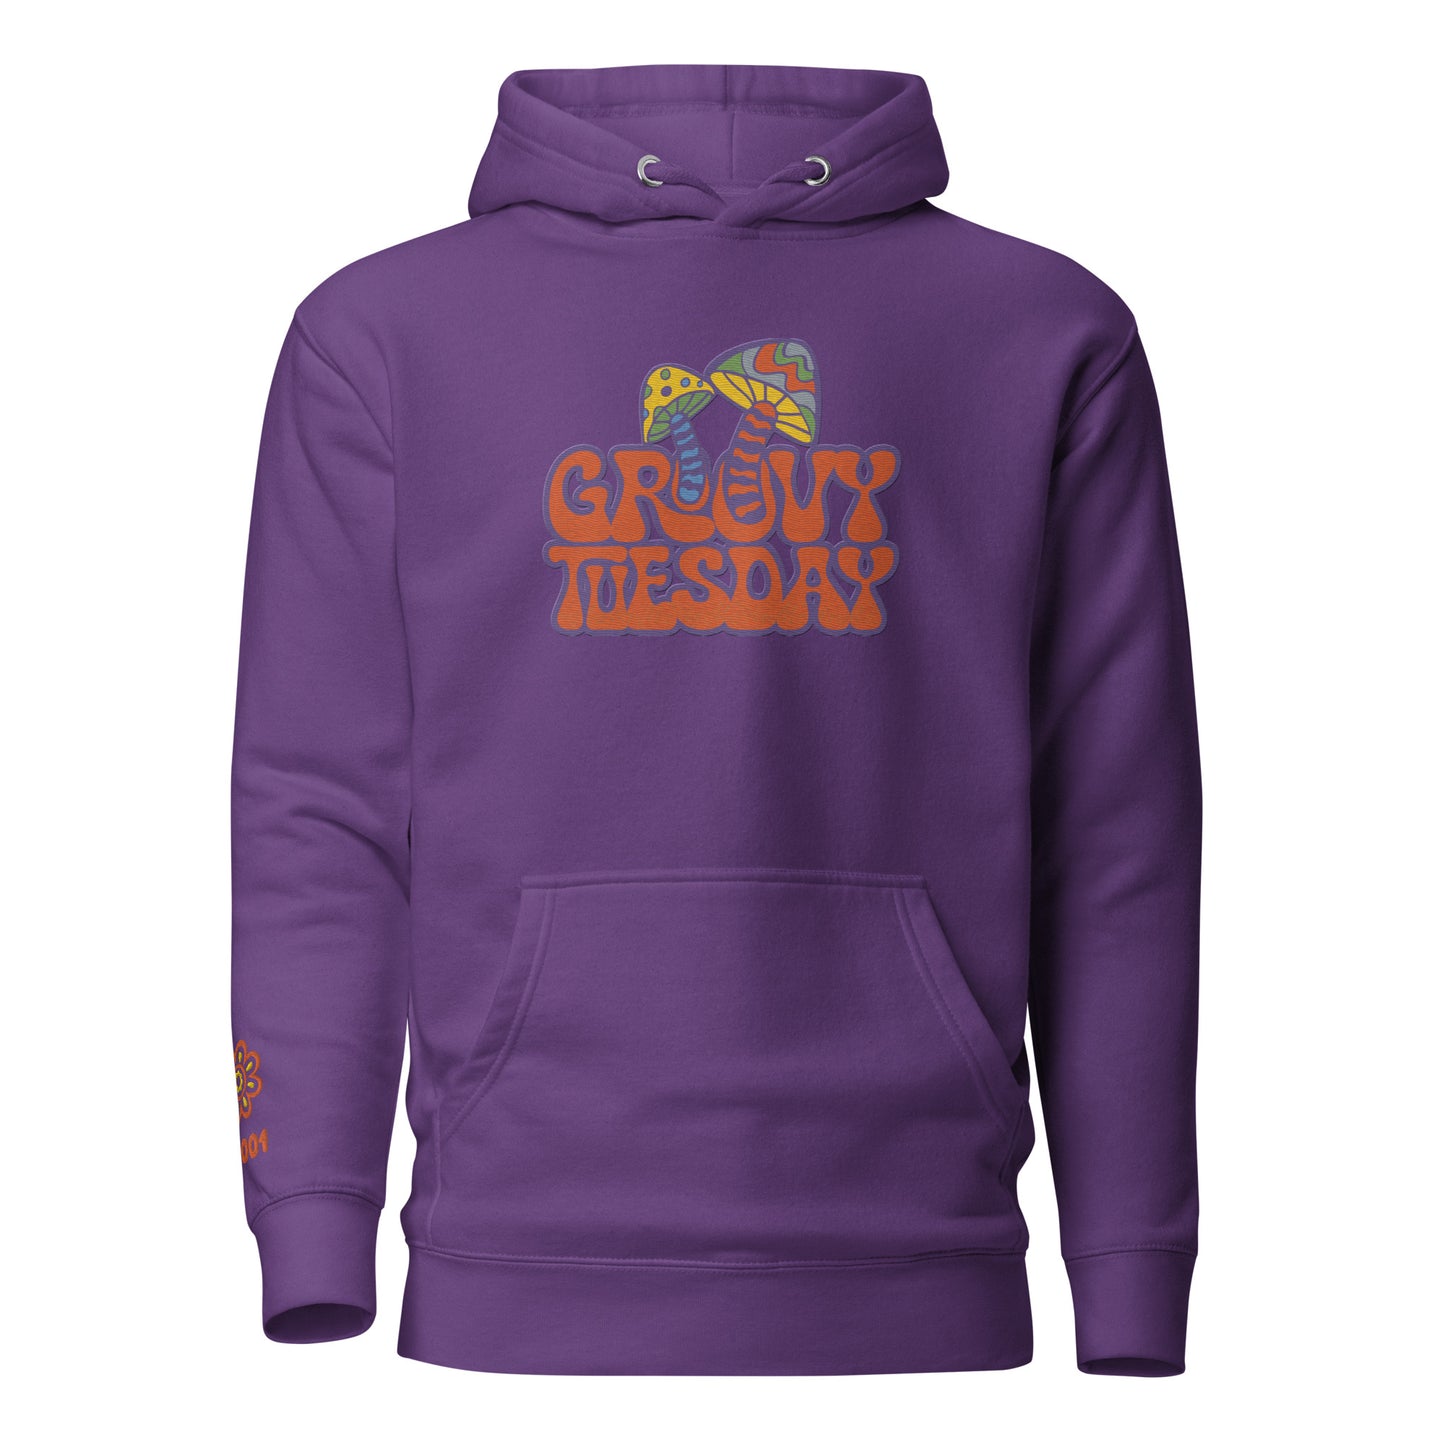 Groovy Tuesday Limited Edition Unisex Hoodie